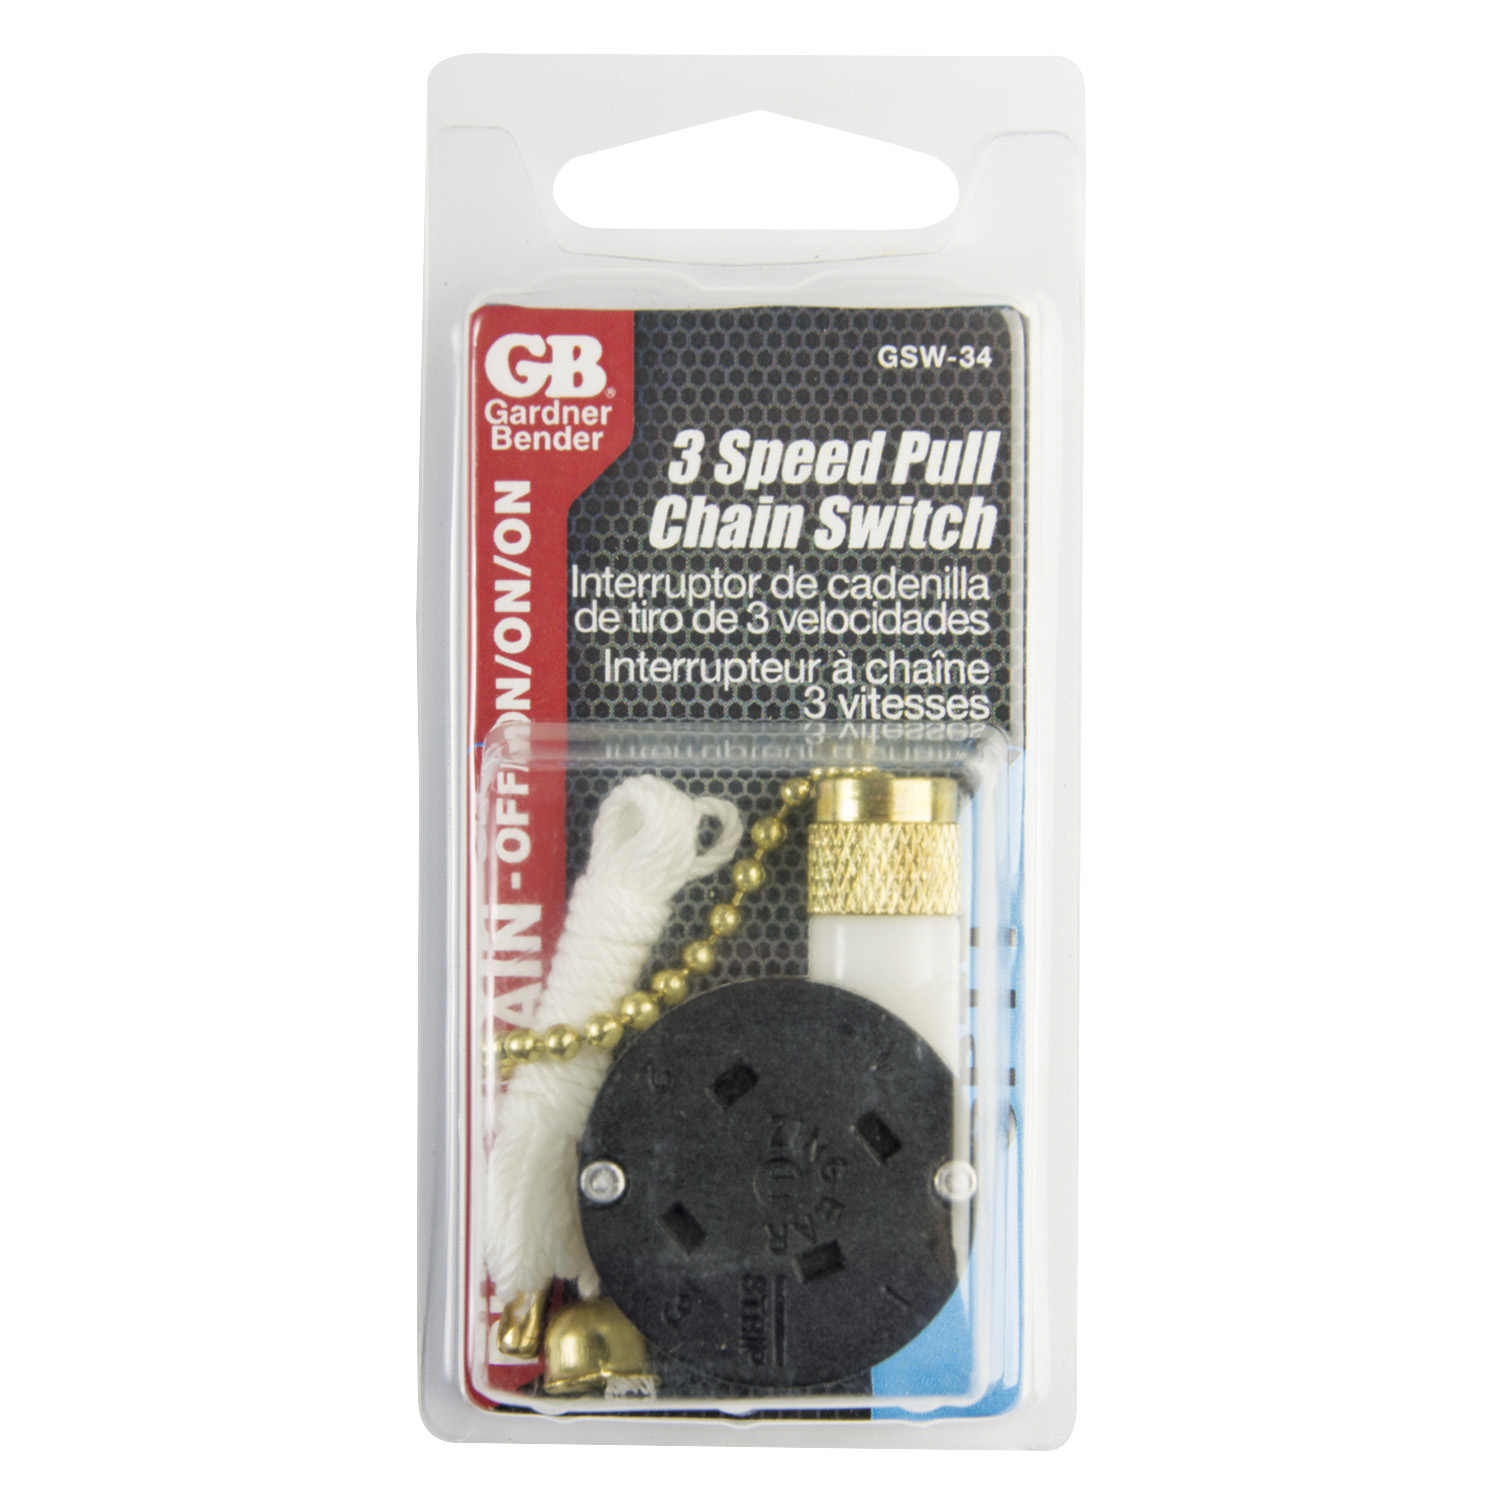 Pull Chain 2 Speed Switch 01727 